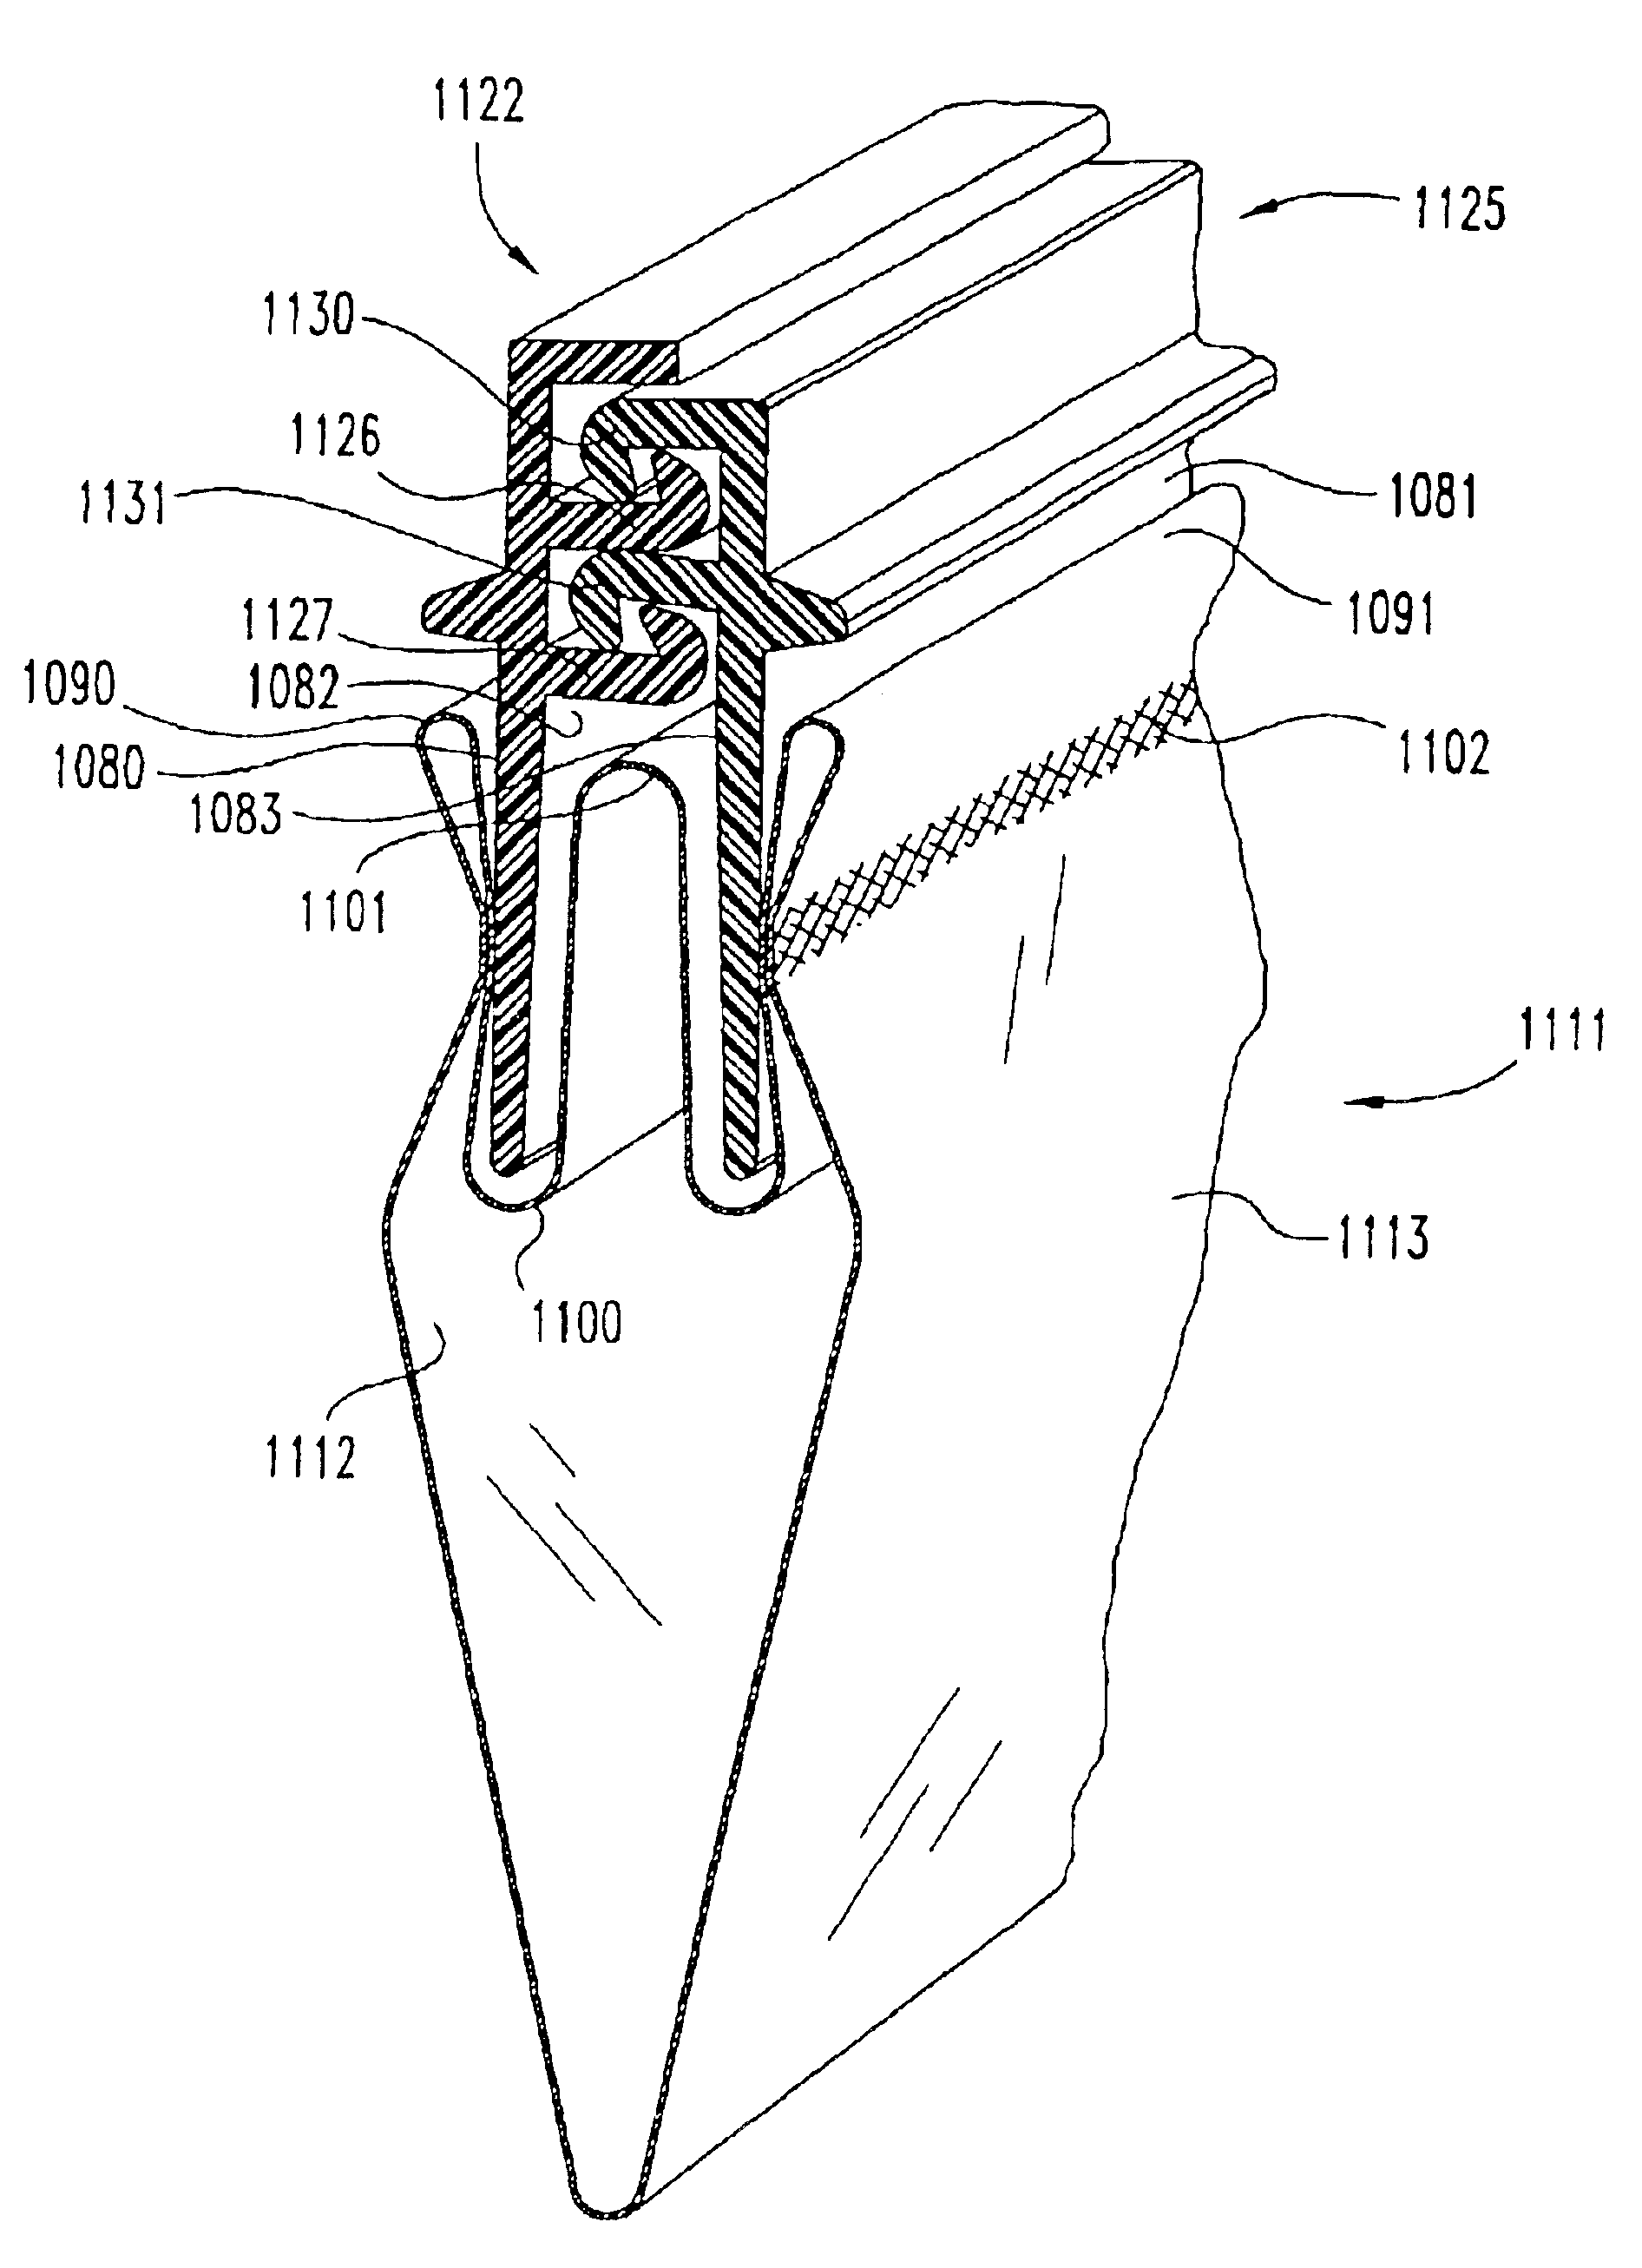 Method and apparatus for placing a product in a flexible recloseable container